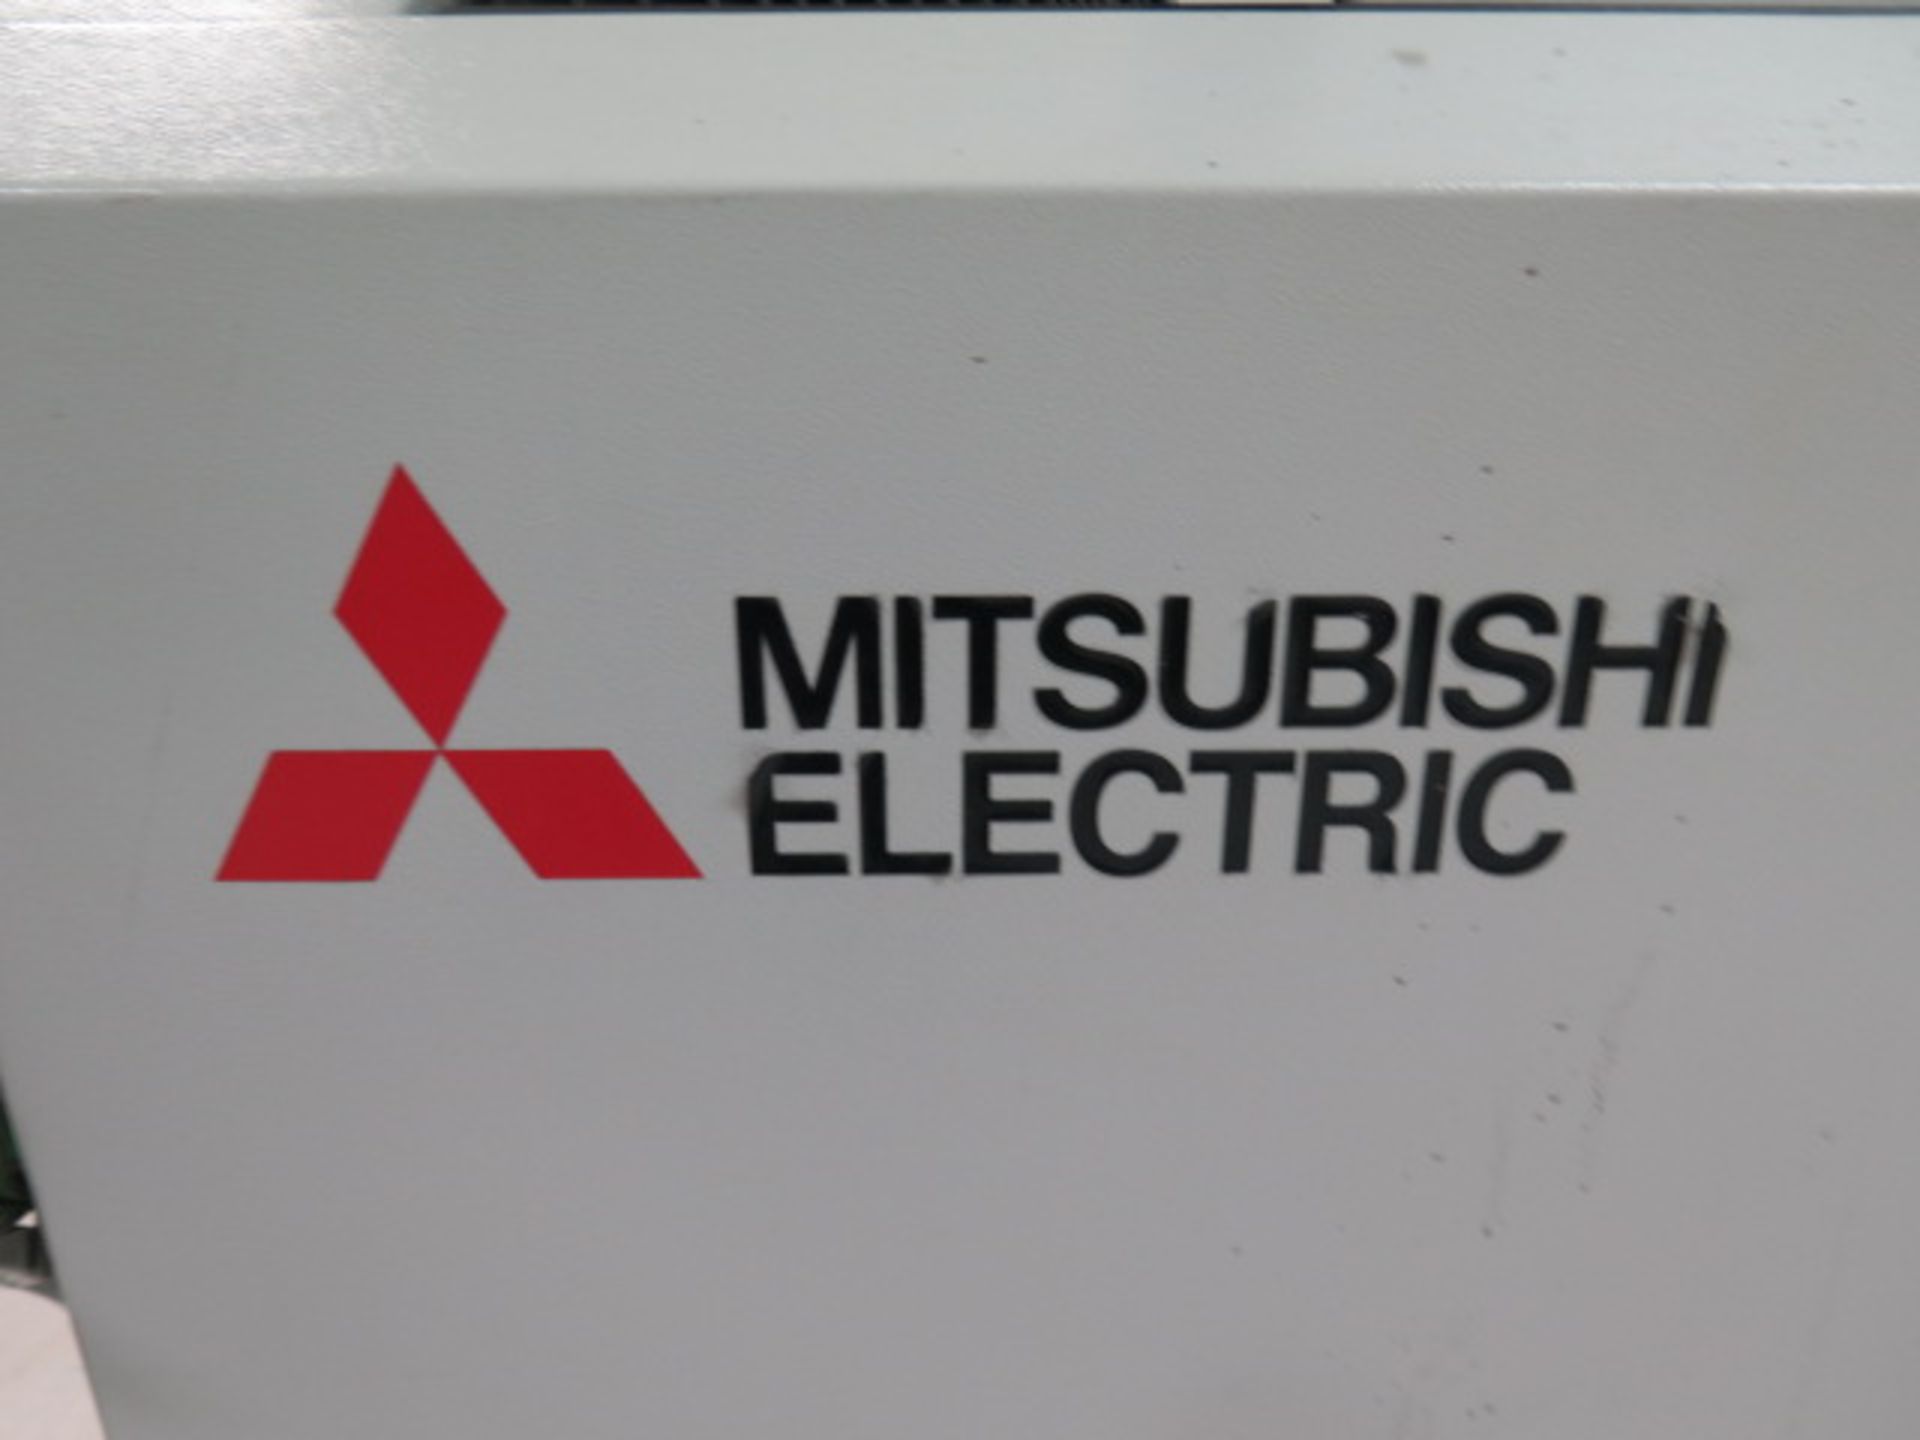 2014 Mitsubishi MD+ PRO III mdl. MV1200S CNC Wire EDM s/n 54D1M091 w/ Mitsubishi M700, SOLD AS IS - Image 15 of 27